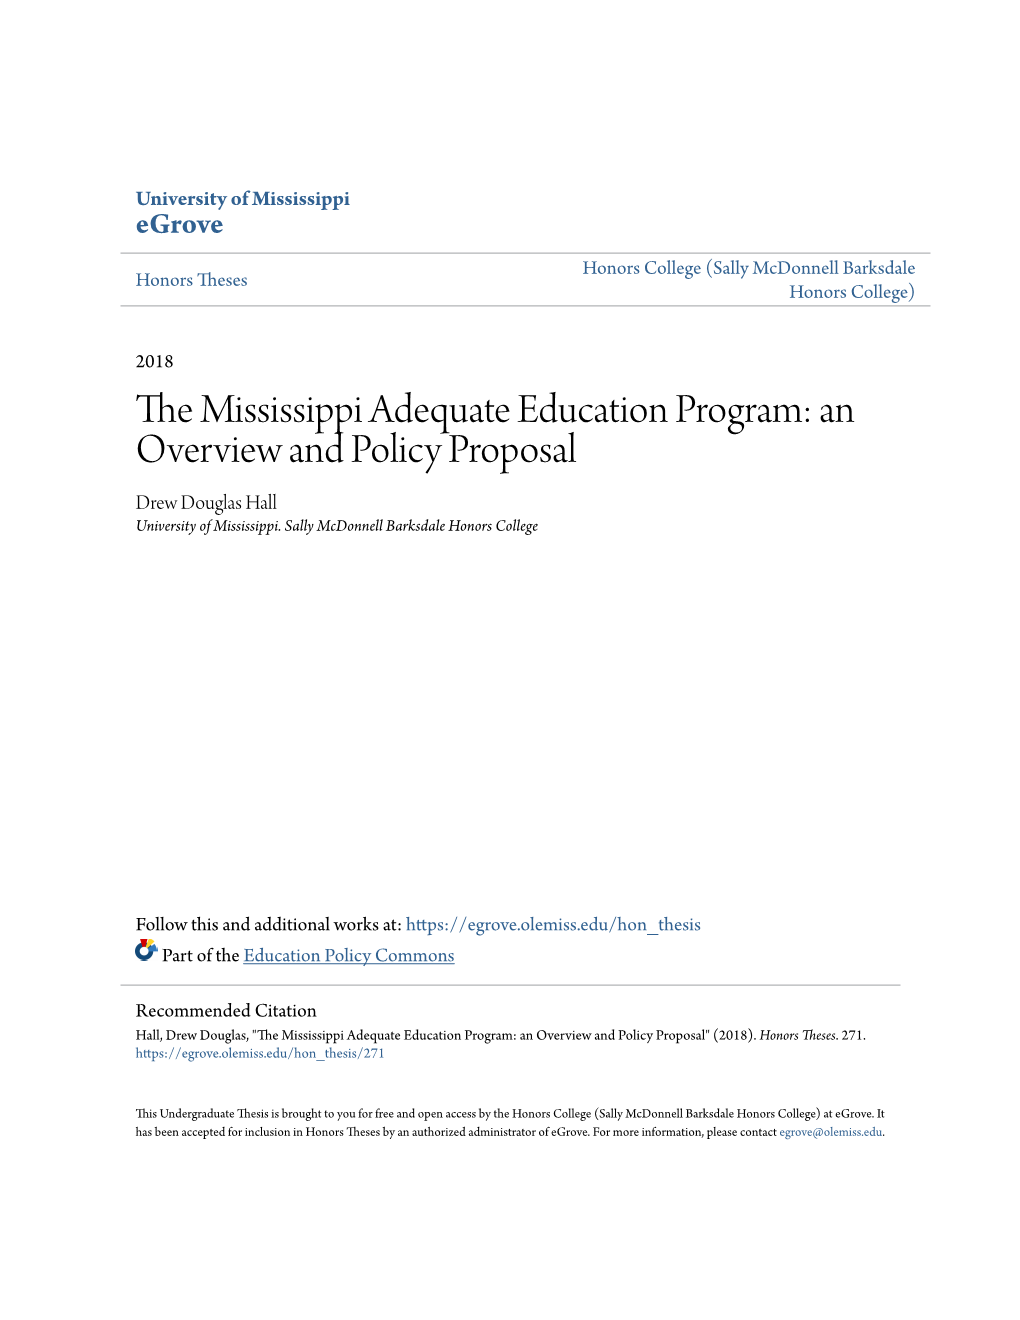 The Mississippi Adequate Education Program: an Overview and Policy Proposal